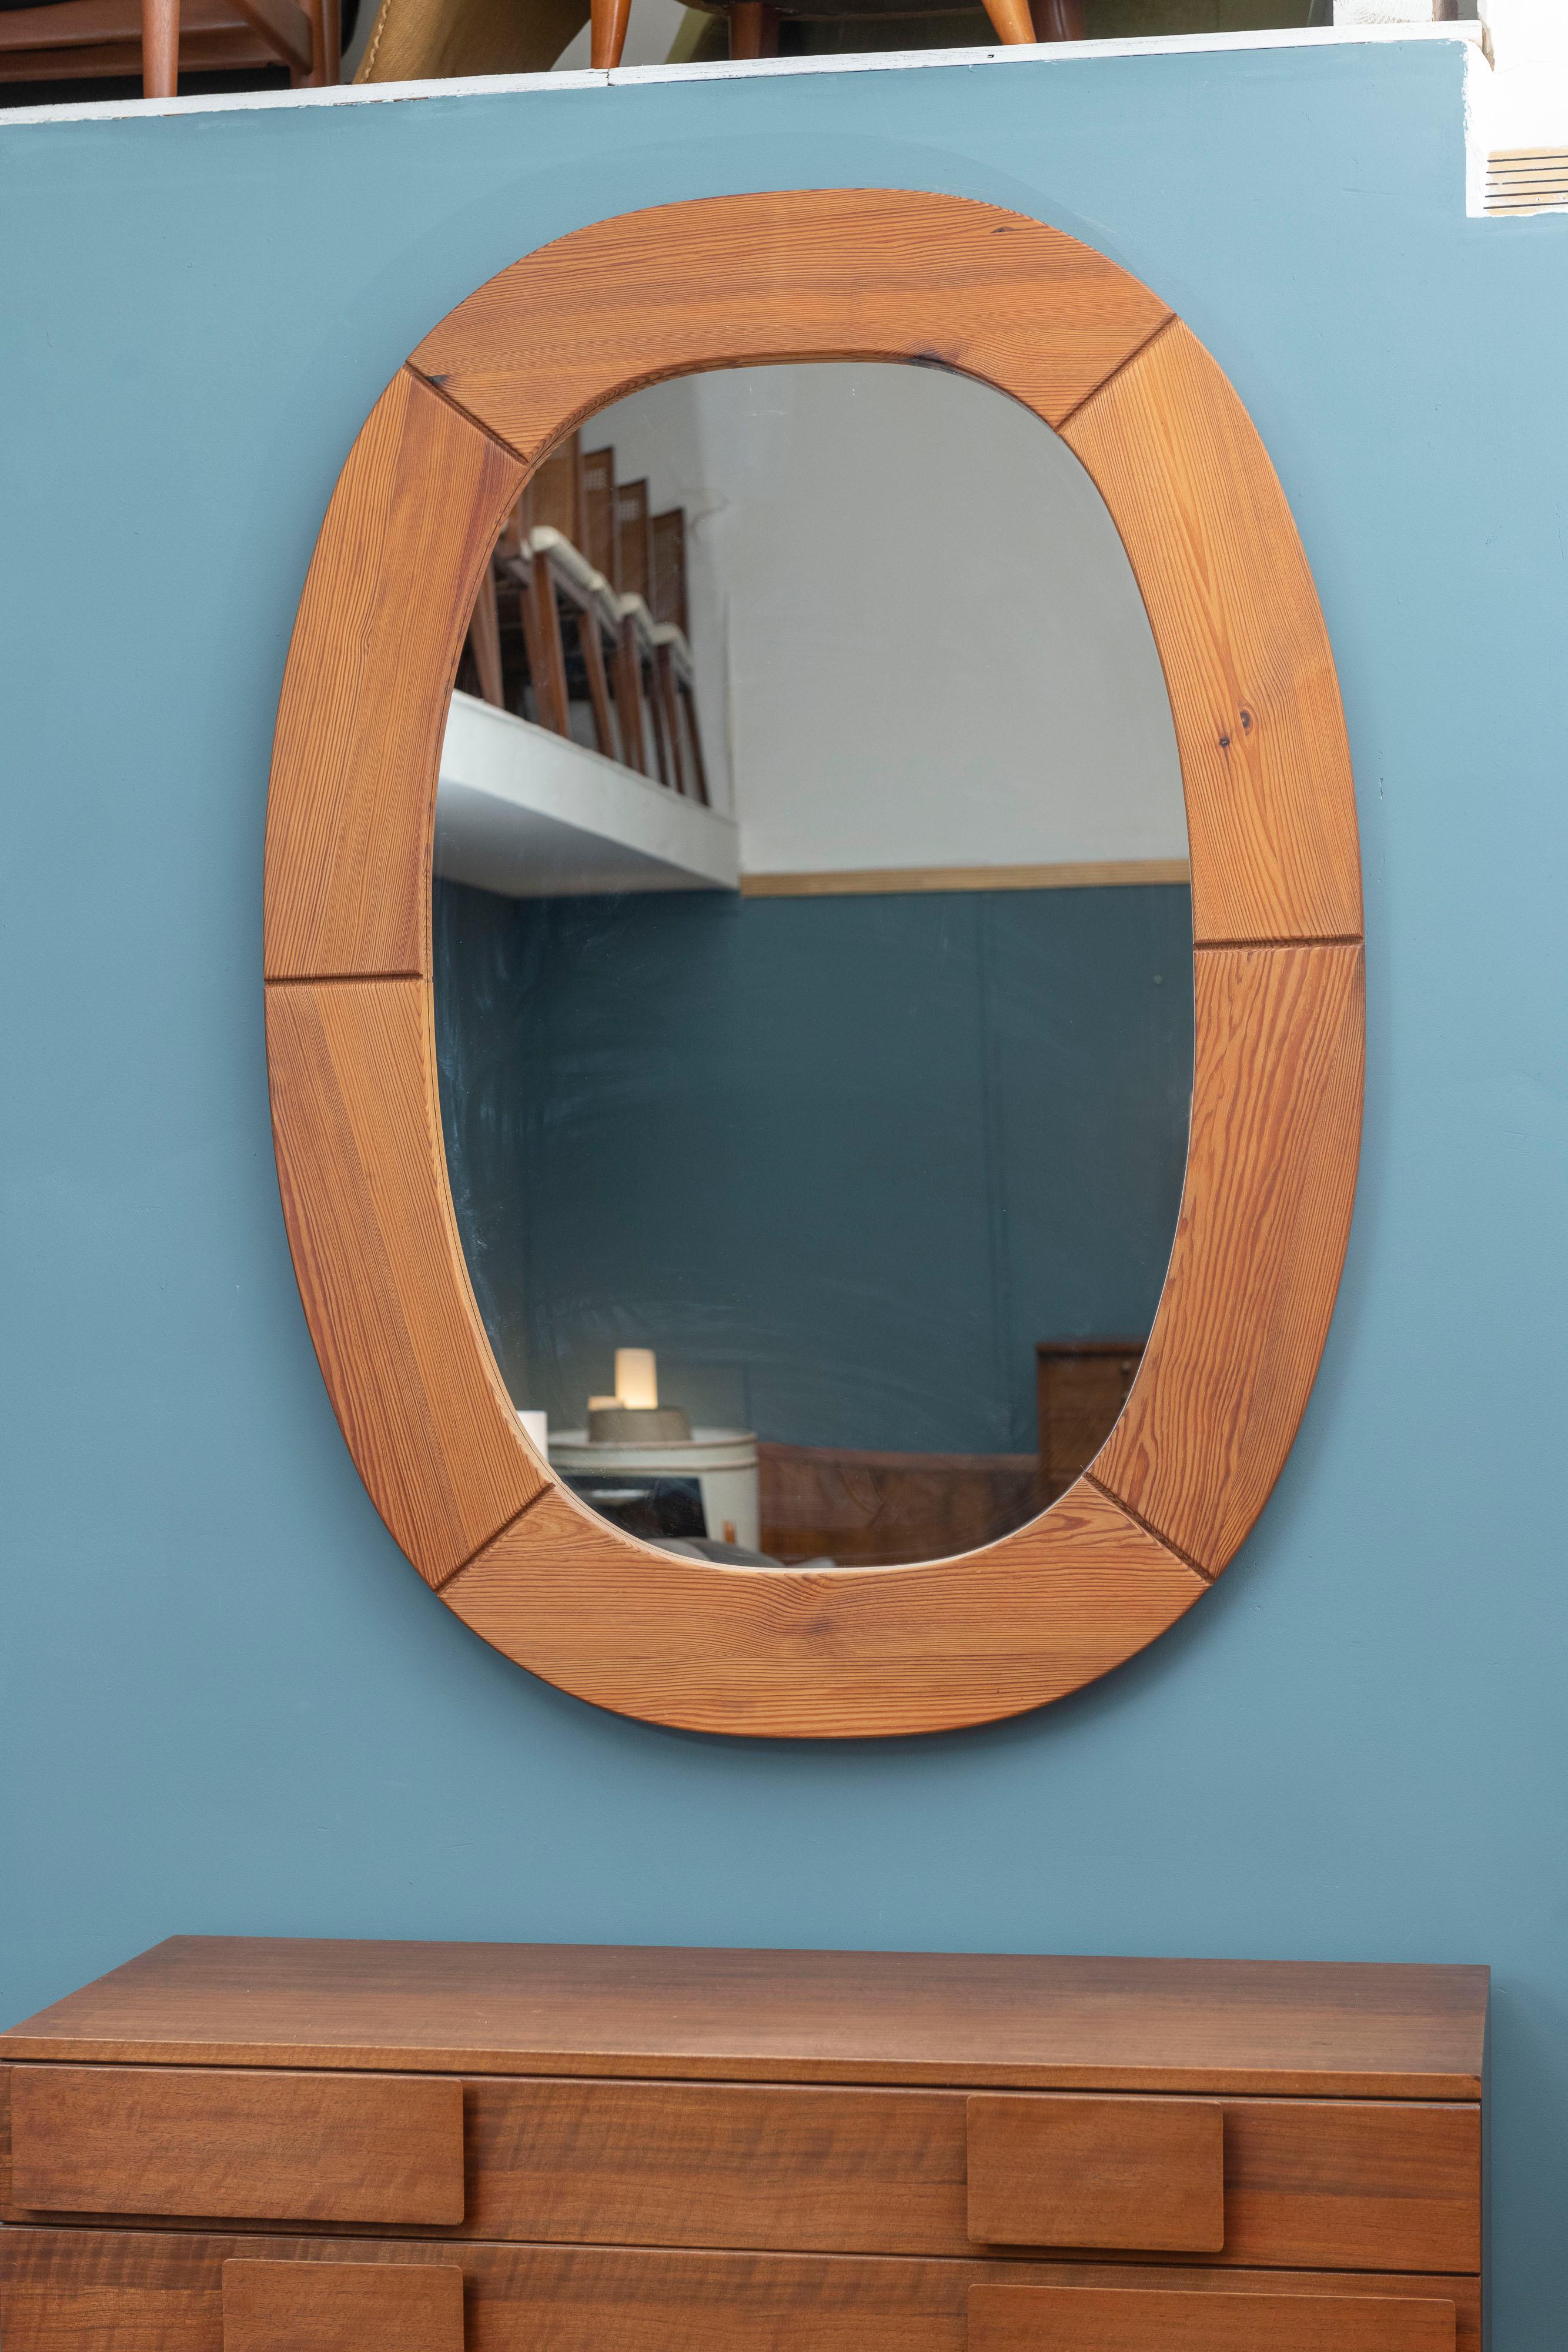 Large Scandinavian Modern solid pine wall mirror in a wonderful oval or cushion shape frame designed by Glasmaster for Markaryd, Sweden. High quality craftsmanship and execution perfect for a minmalist interior, ready to install.